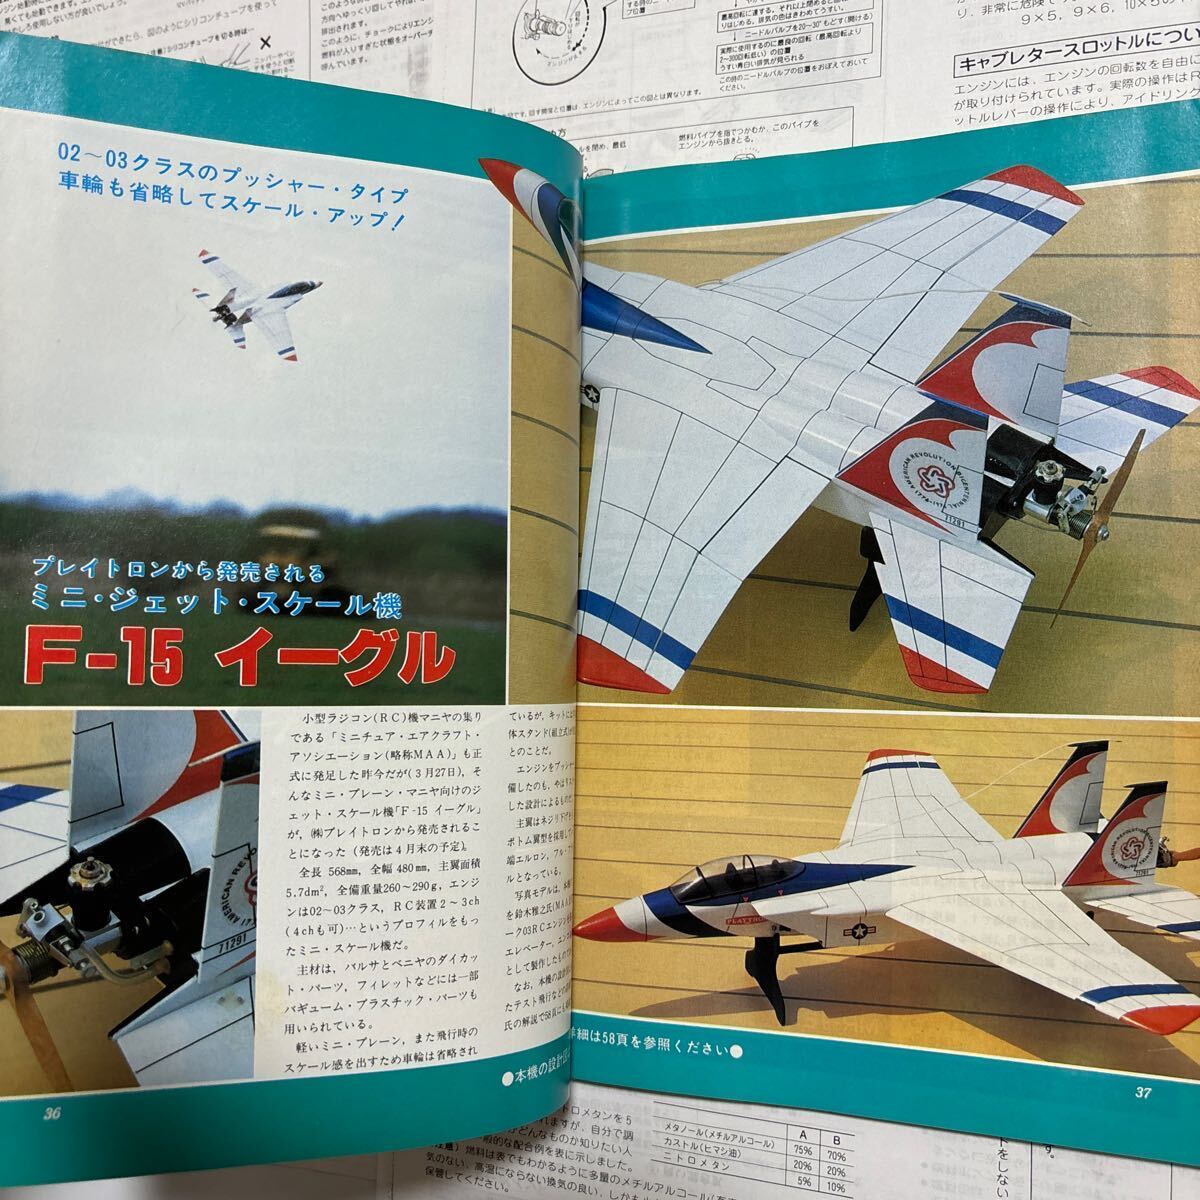 .. start model journal 1983 year 6,7 month number 2 pcs. matching 1 jpy start OS FS-20, jet Stream silencer user's manual Rossi copy 